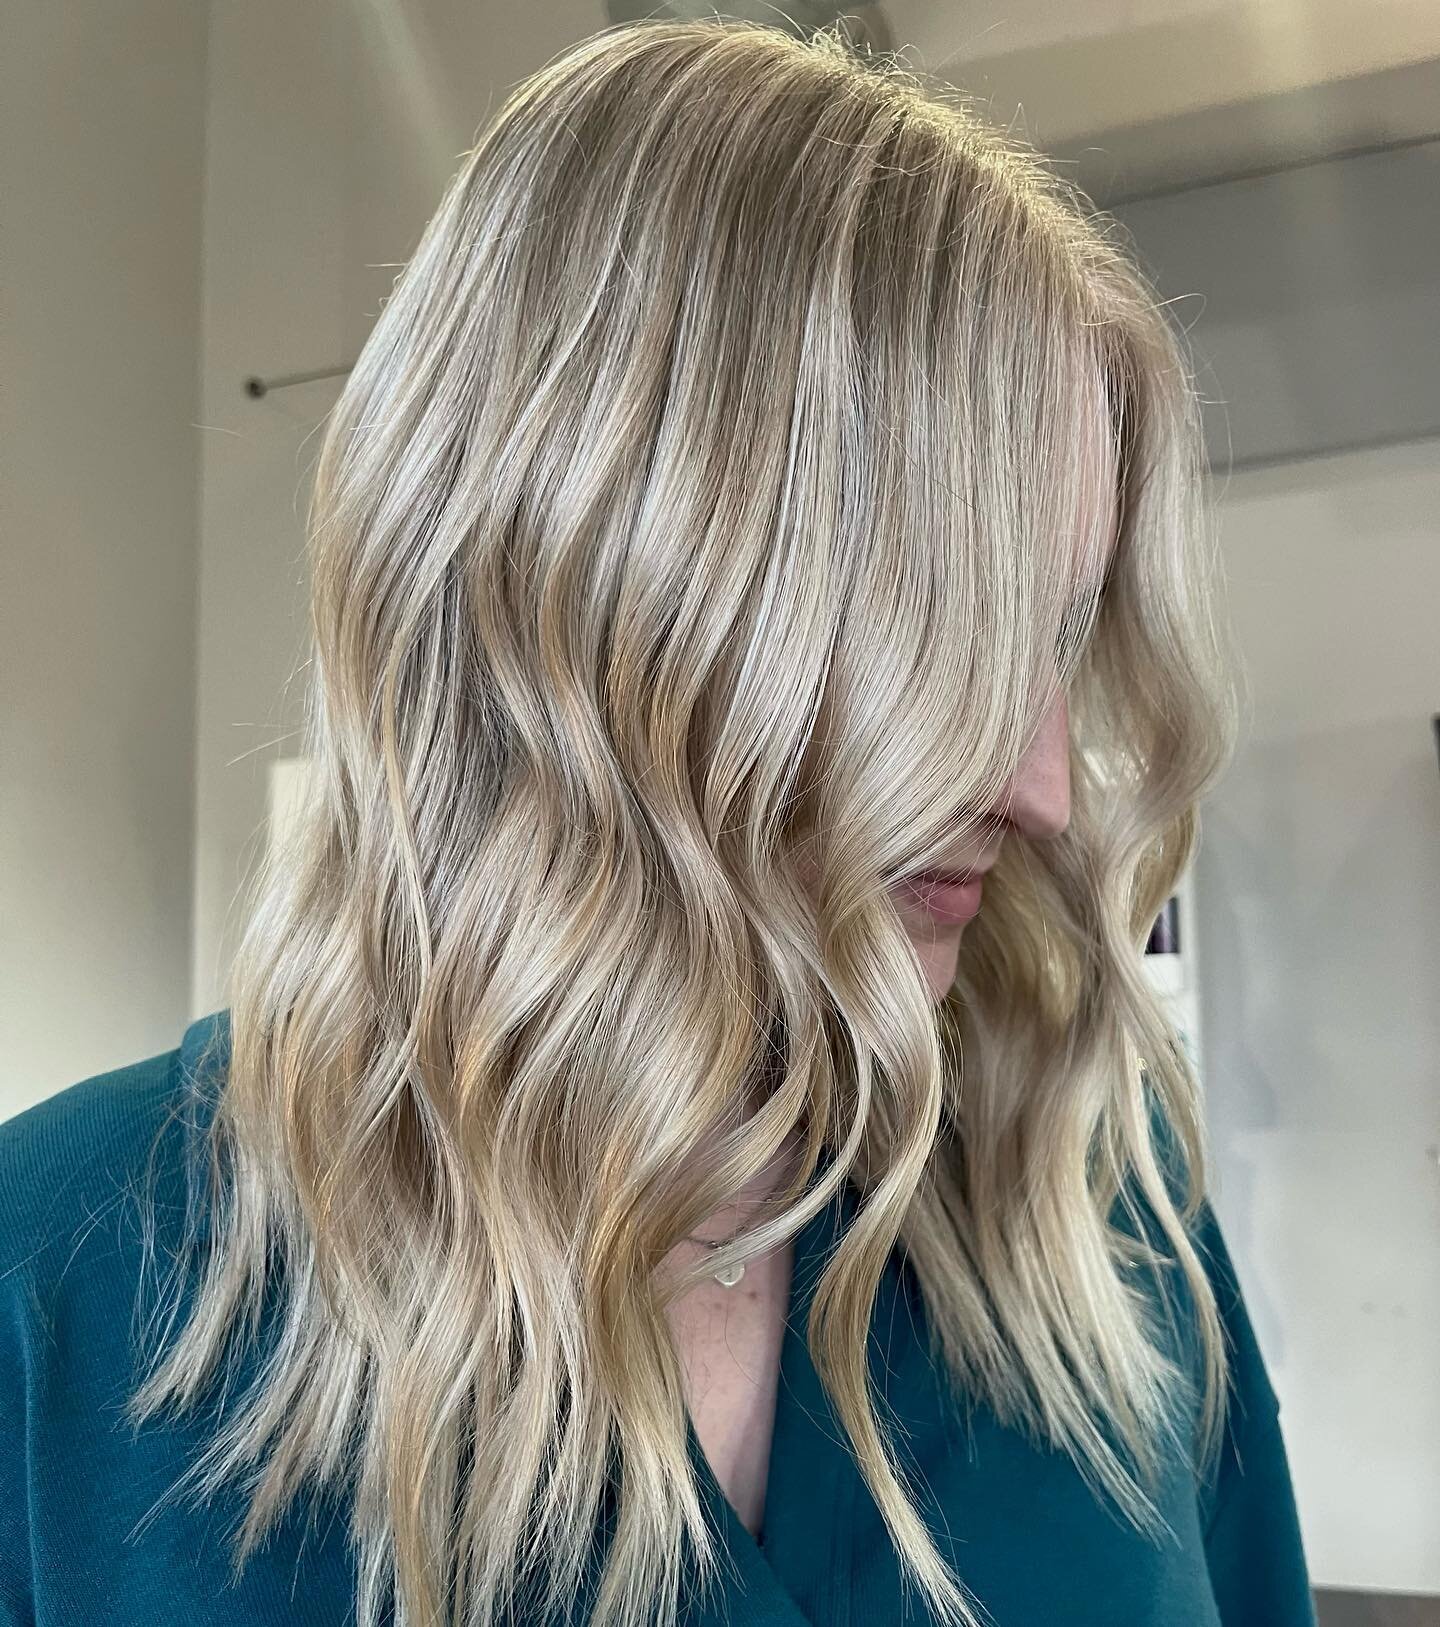 Stunning blonde done by @hairbycheeey 🤍 Call the salon to book your hair appointment! 
&bull;
&bull;

#indianapolis #indianapolisindiana #carmelindiana #carmelindianastylist #indyhair #indyhairstylist #westfieldhair #broadripplehairtylist #indianapo